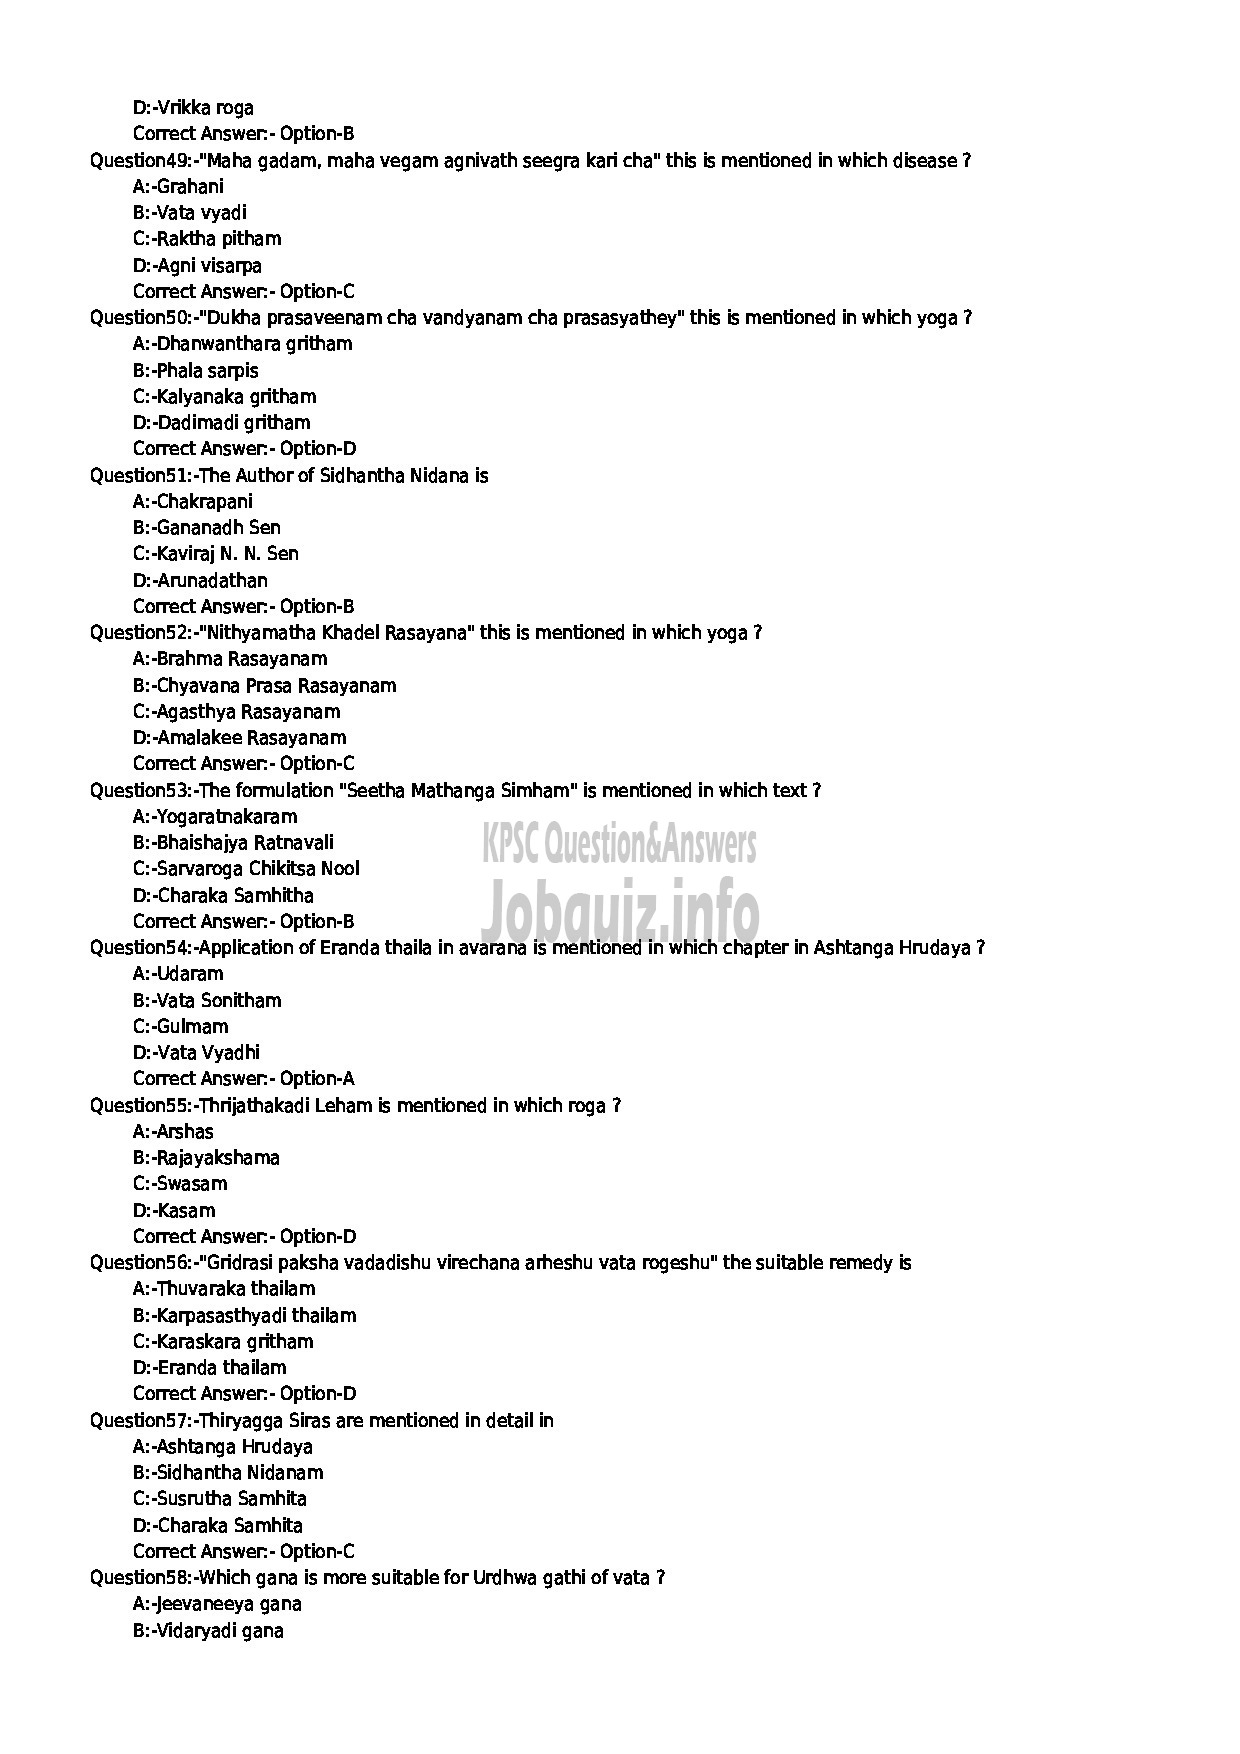 Kerala PSC Question Paper - ASSISTANT INSURANCE MEDICAL OFFICER AYURVEDA-6